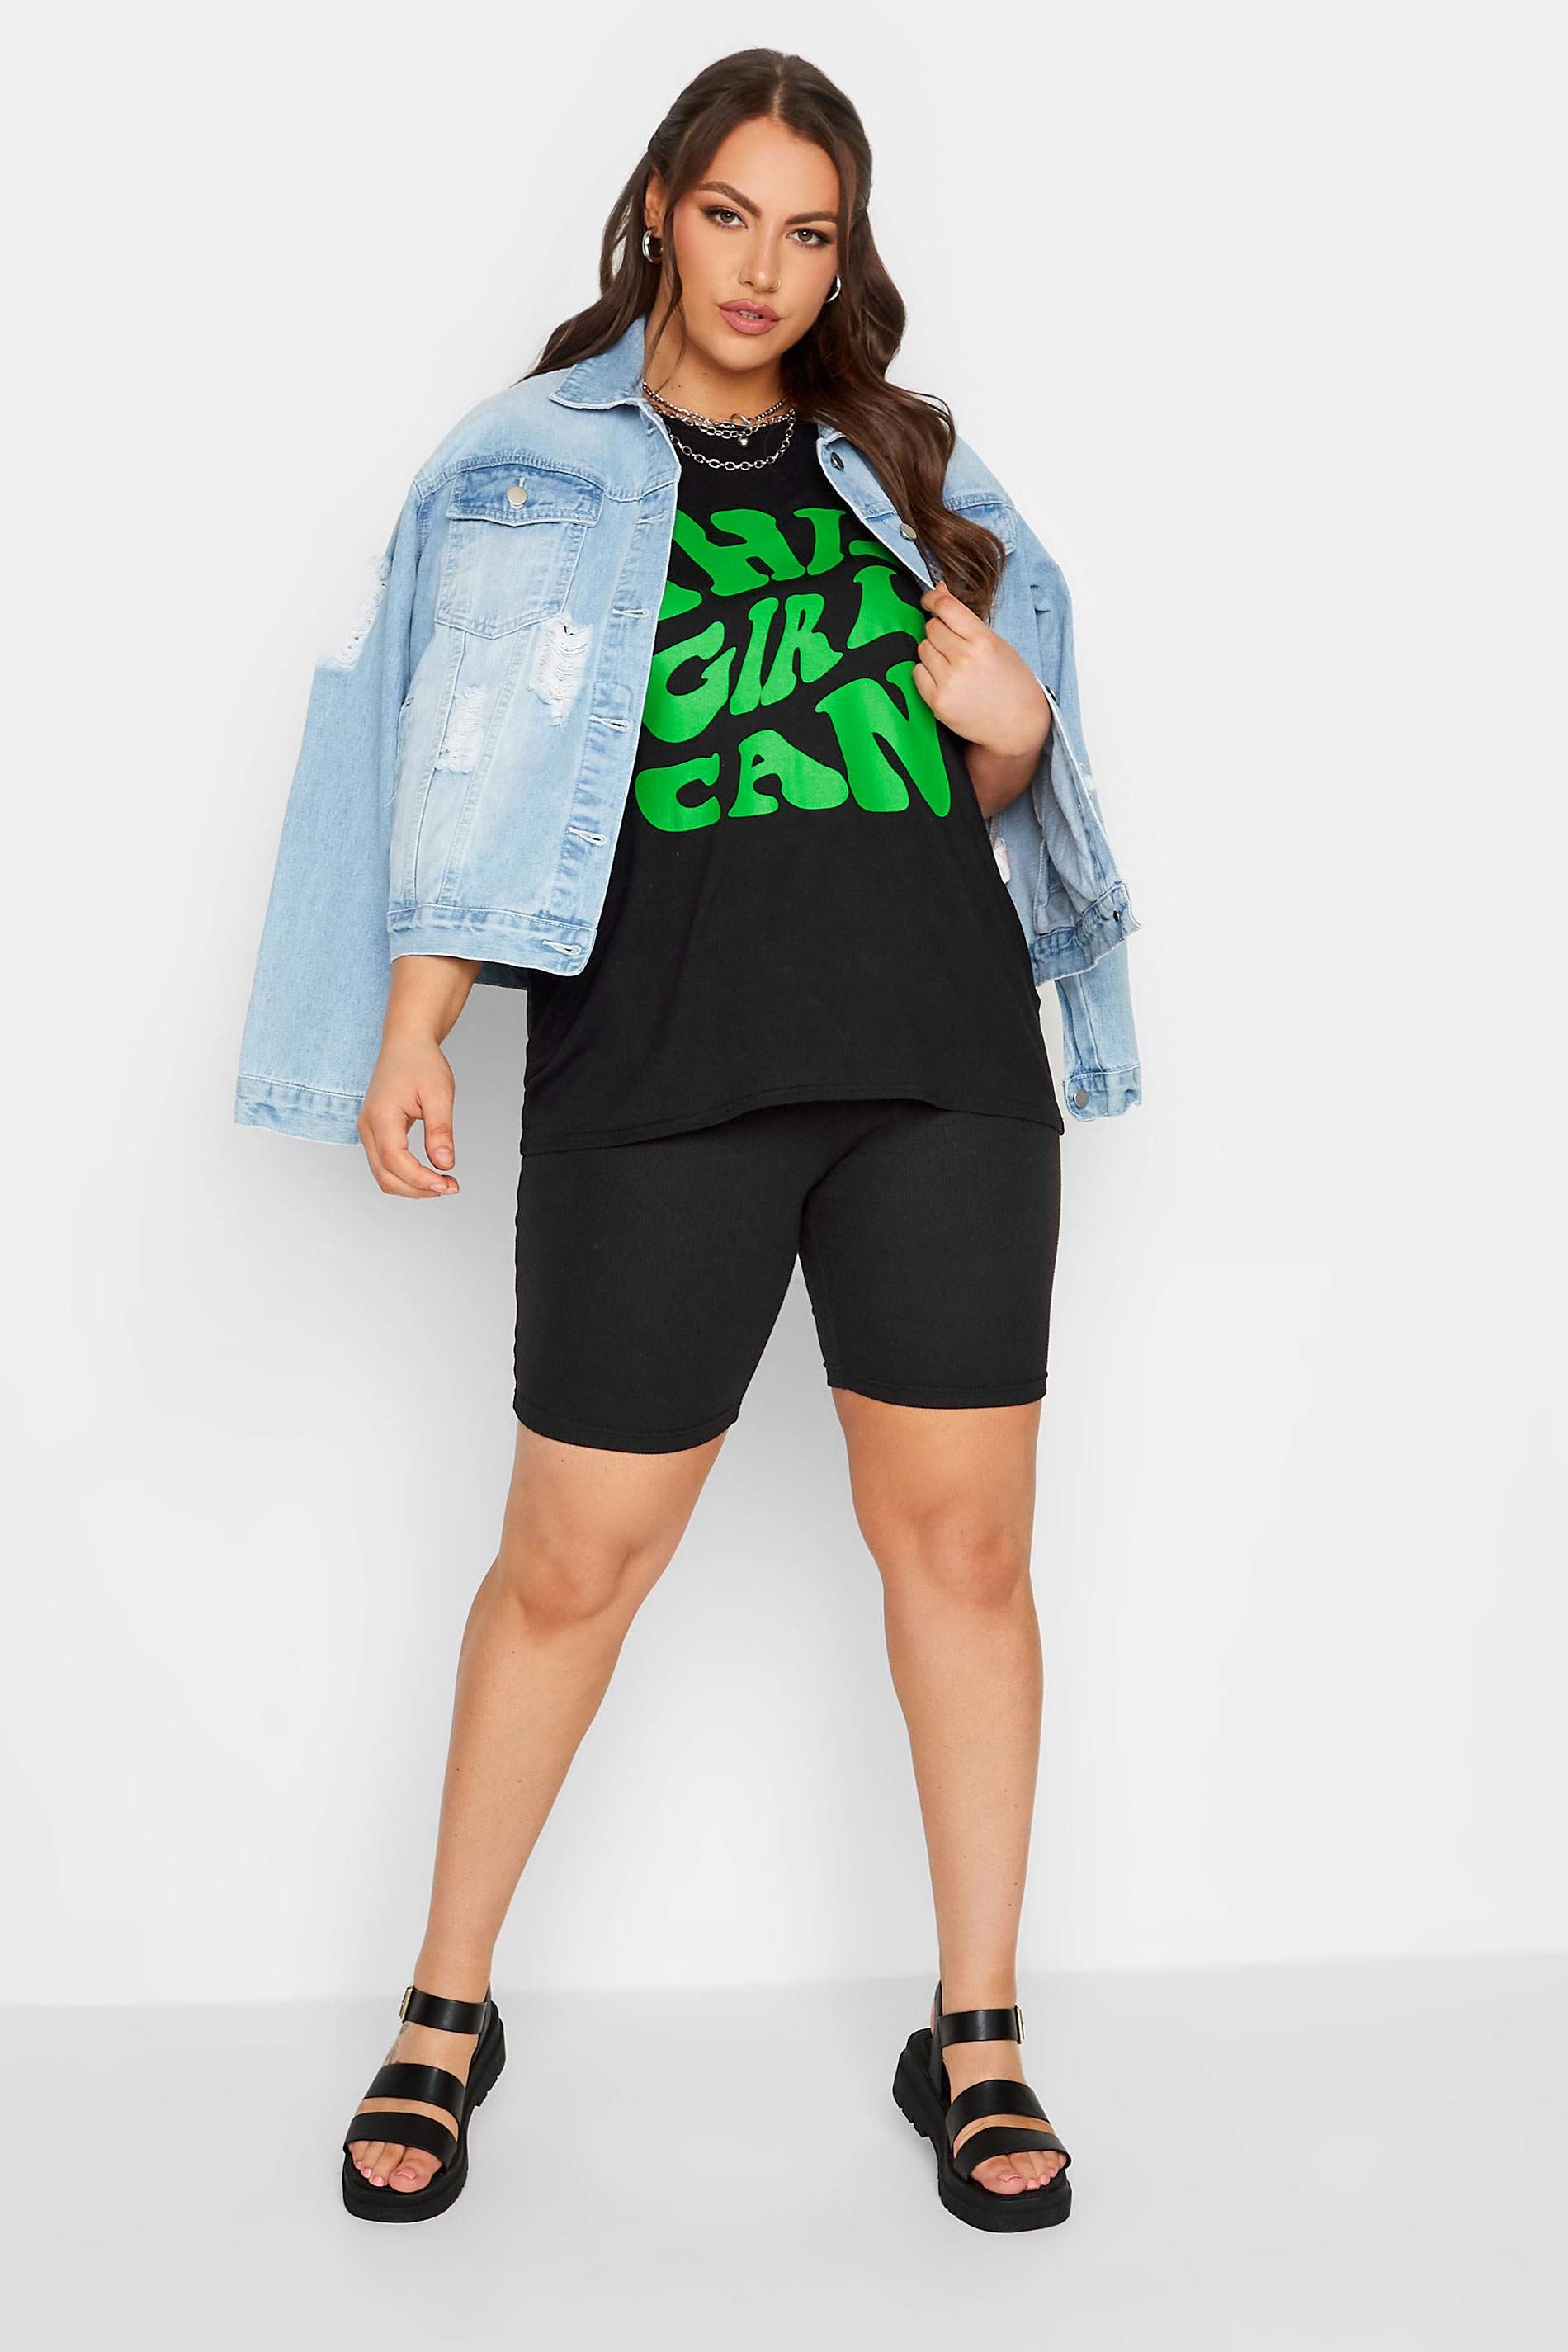 LIMITED COLLECTION Plus Size Black 'This Girl Can' Slogan T-Shirt | Yours Clothing 2